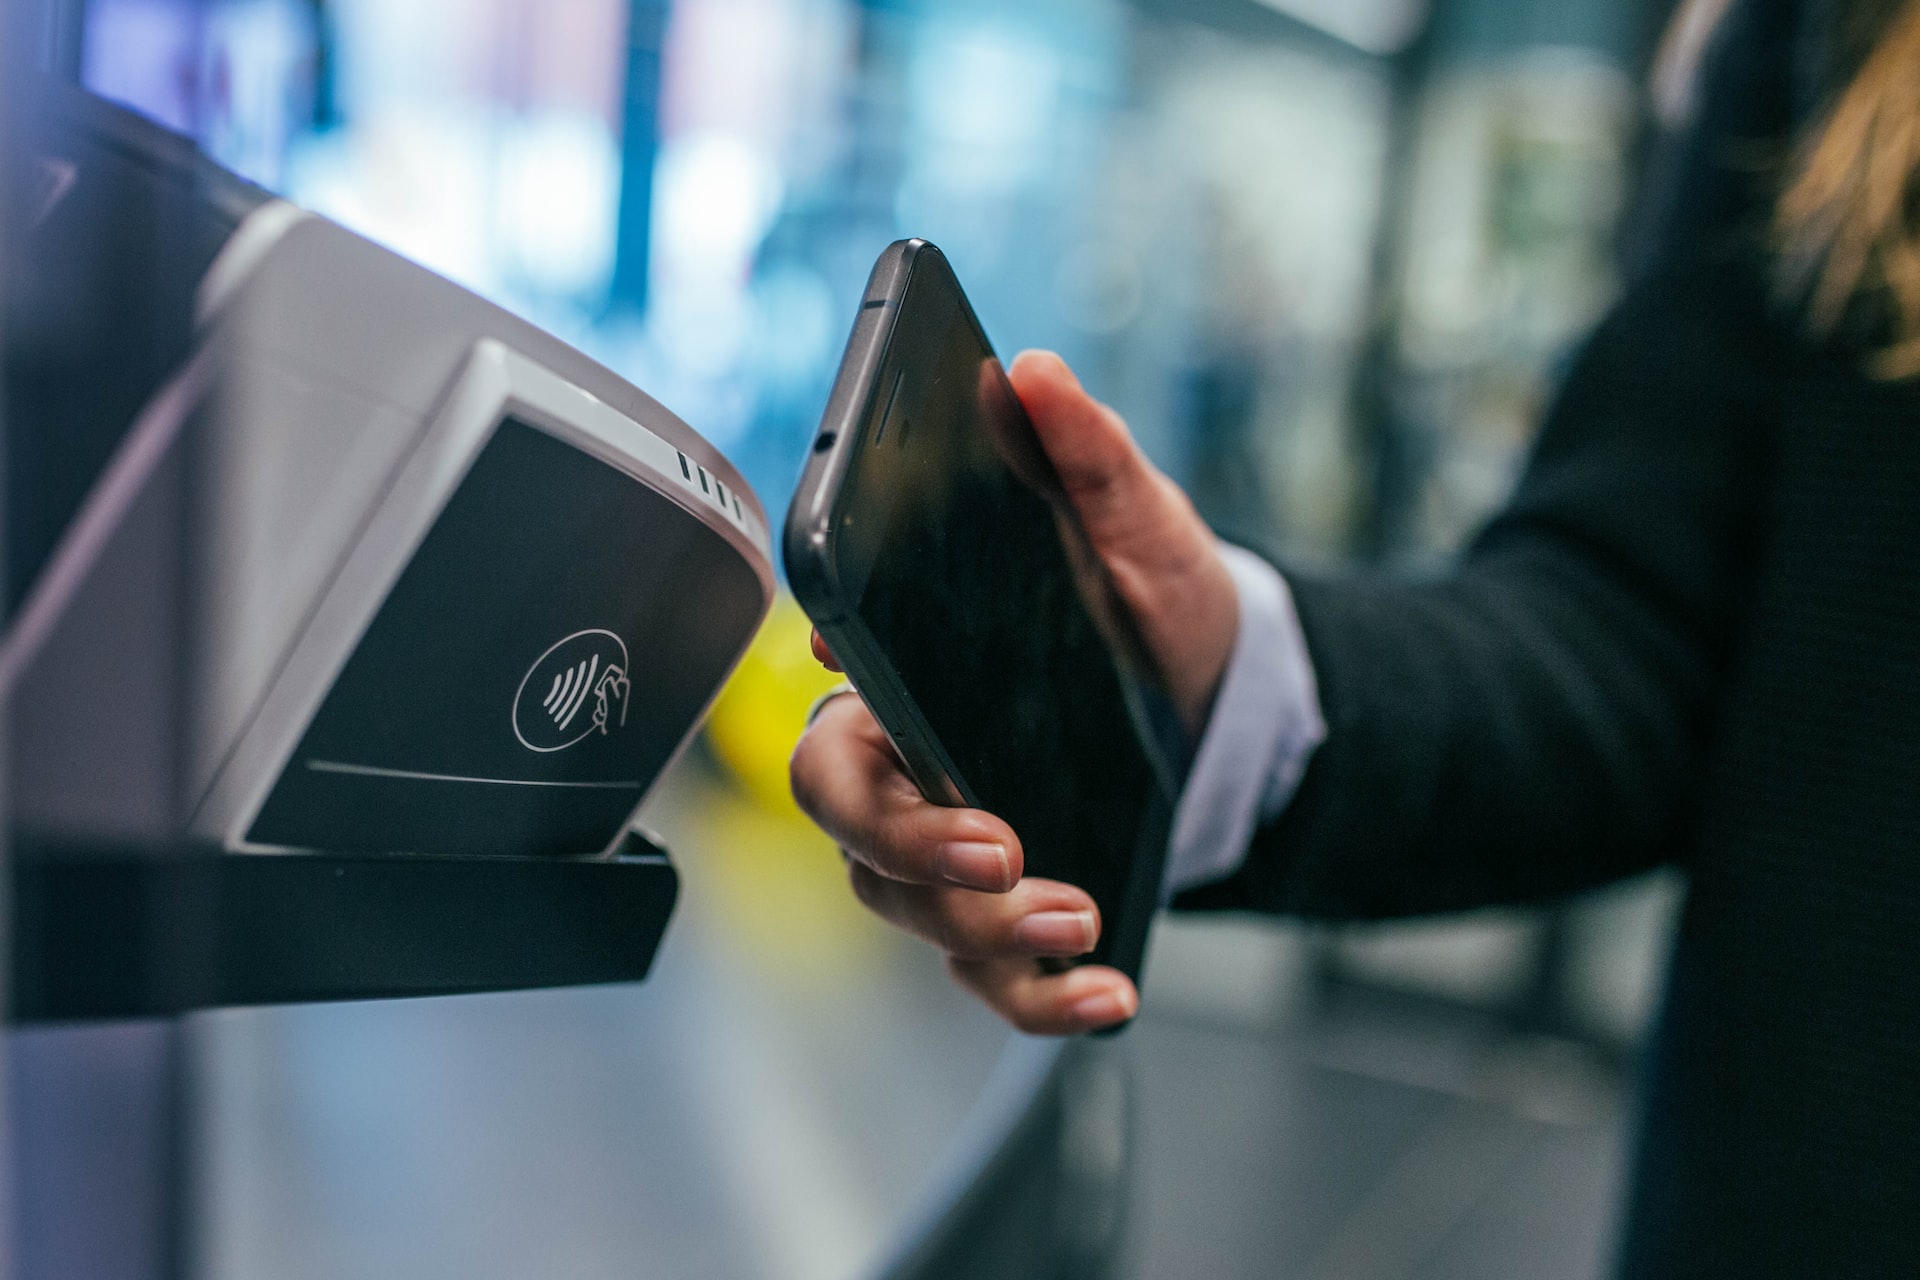 contactless payments market will increase